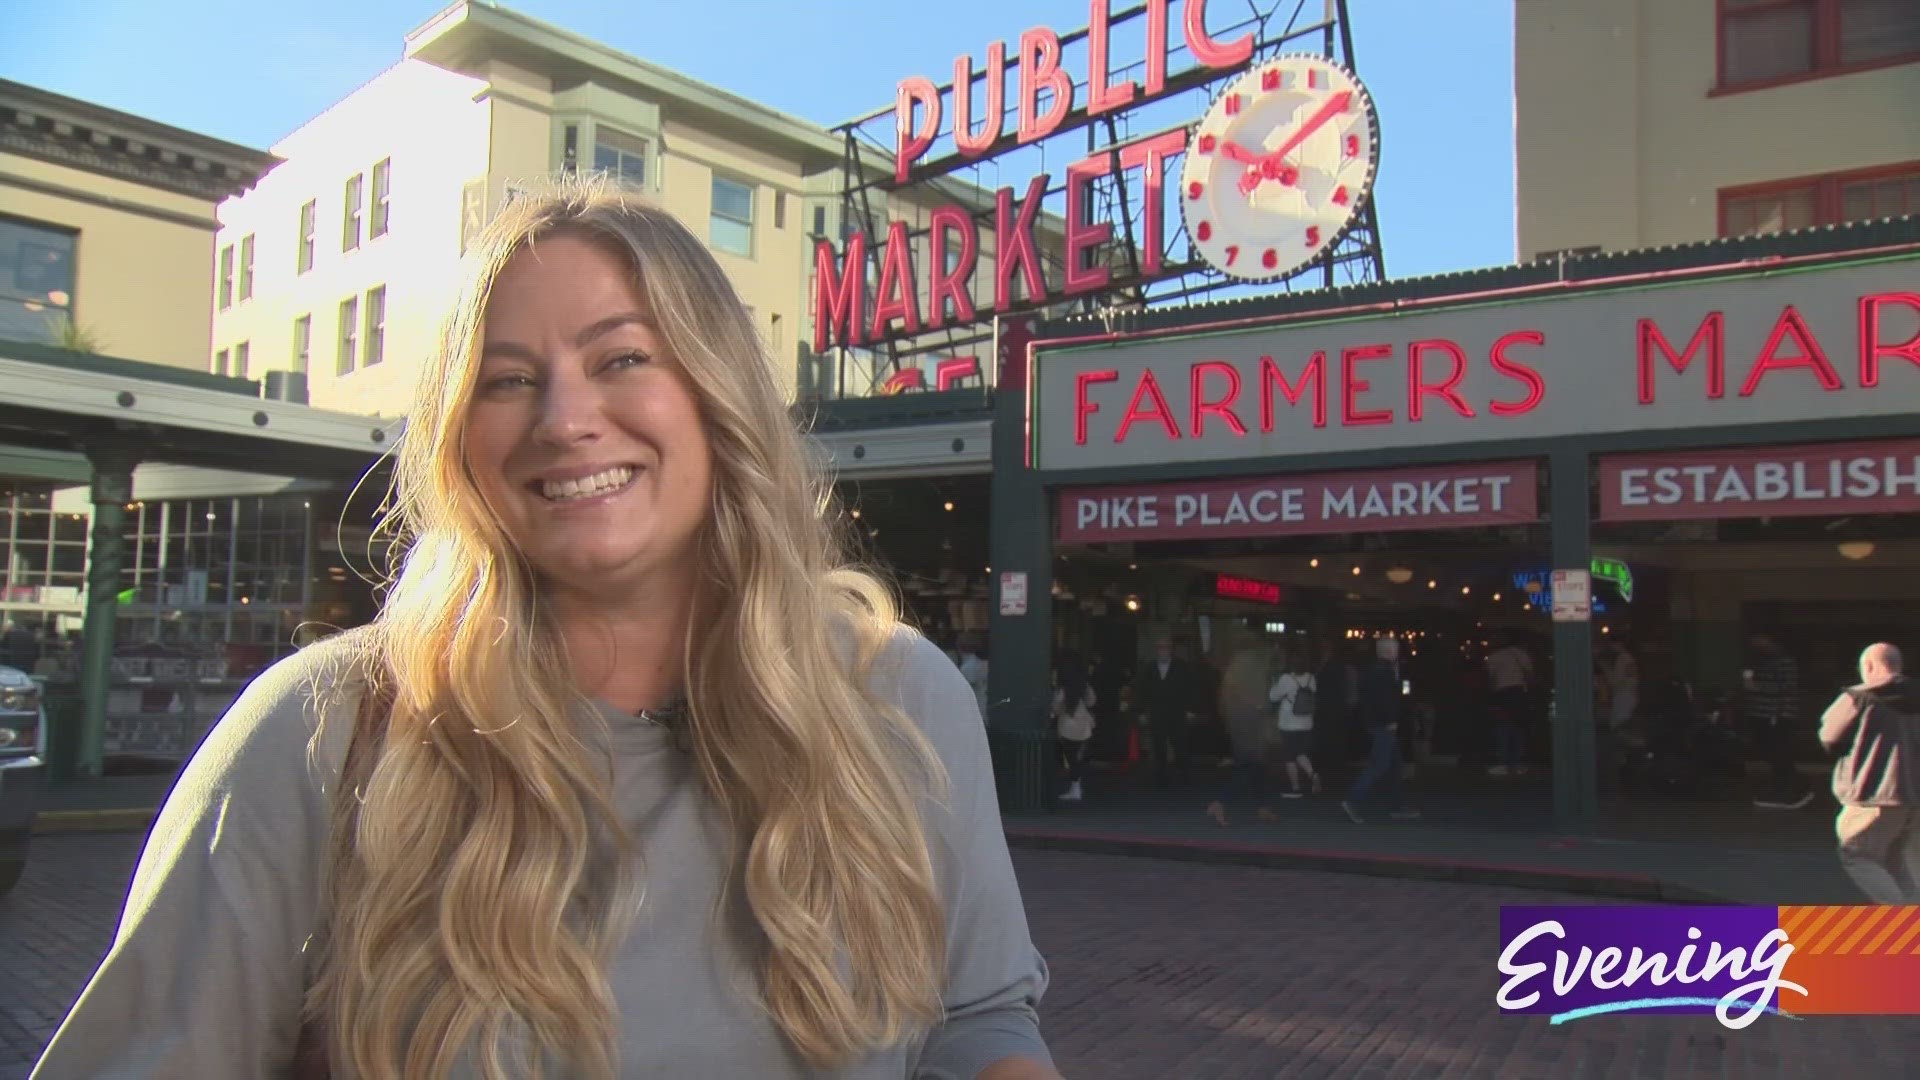 Loni James is dating her way around the world. #k5evening